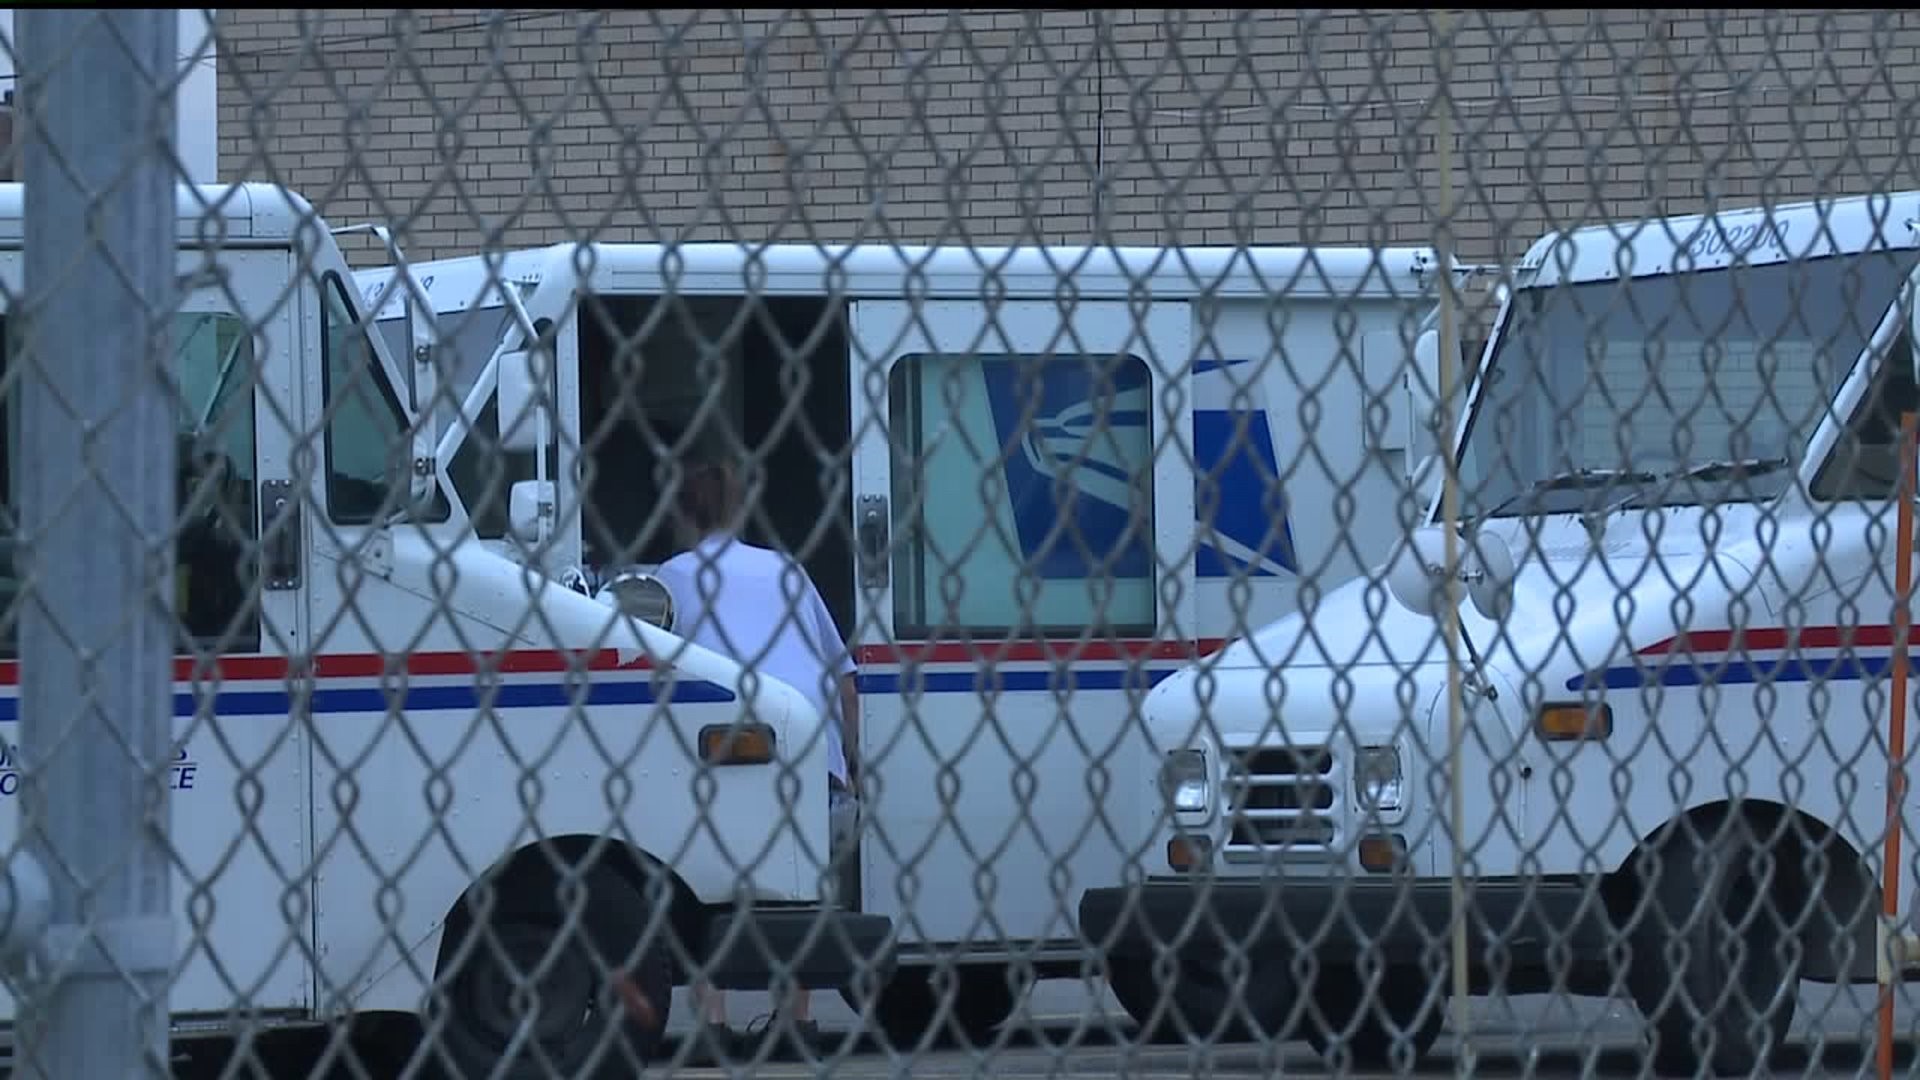 Moline Post Office to open